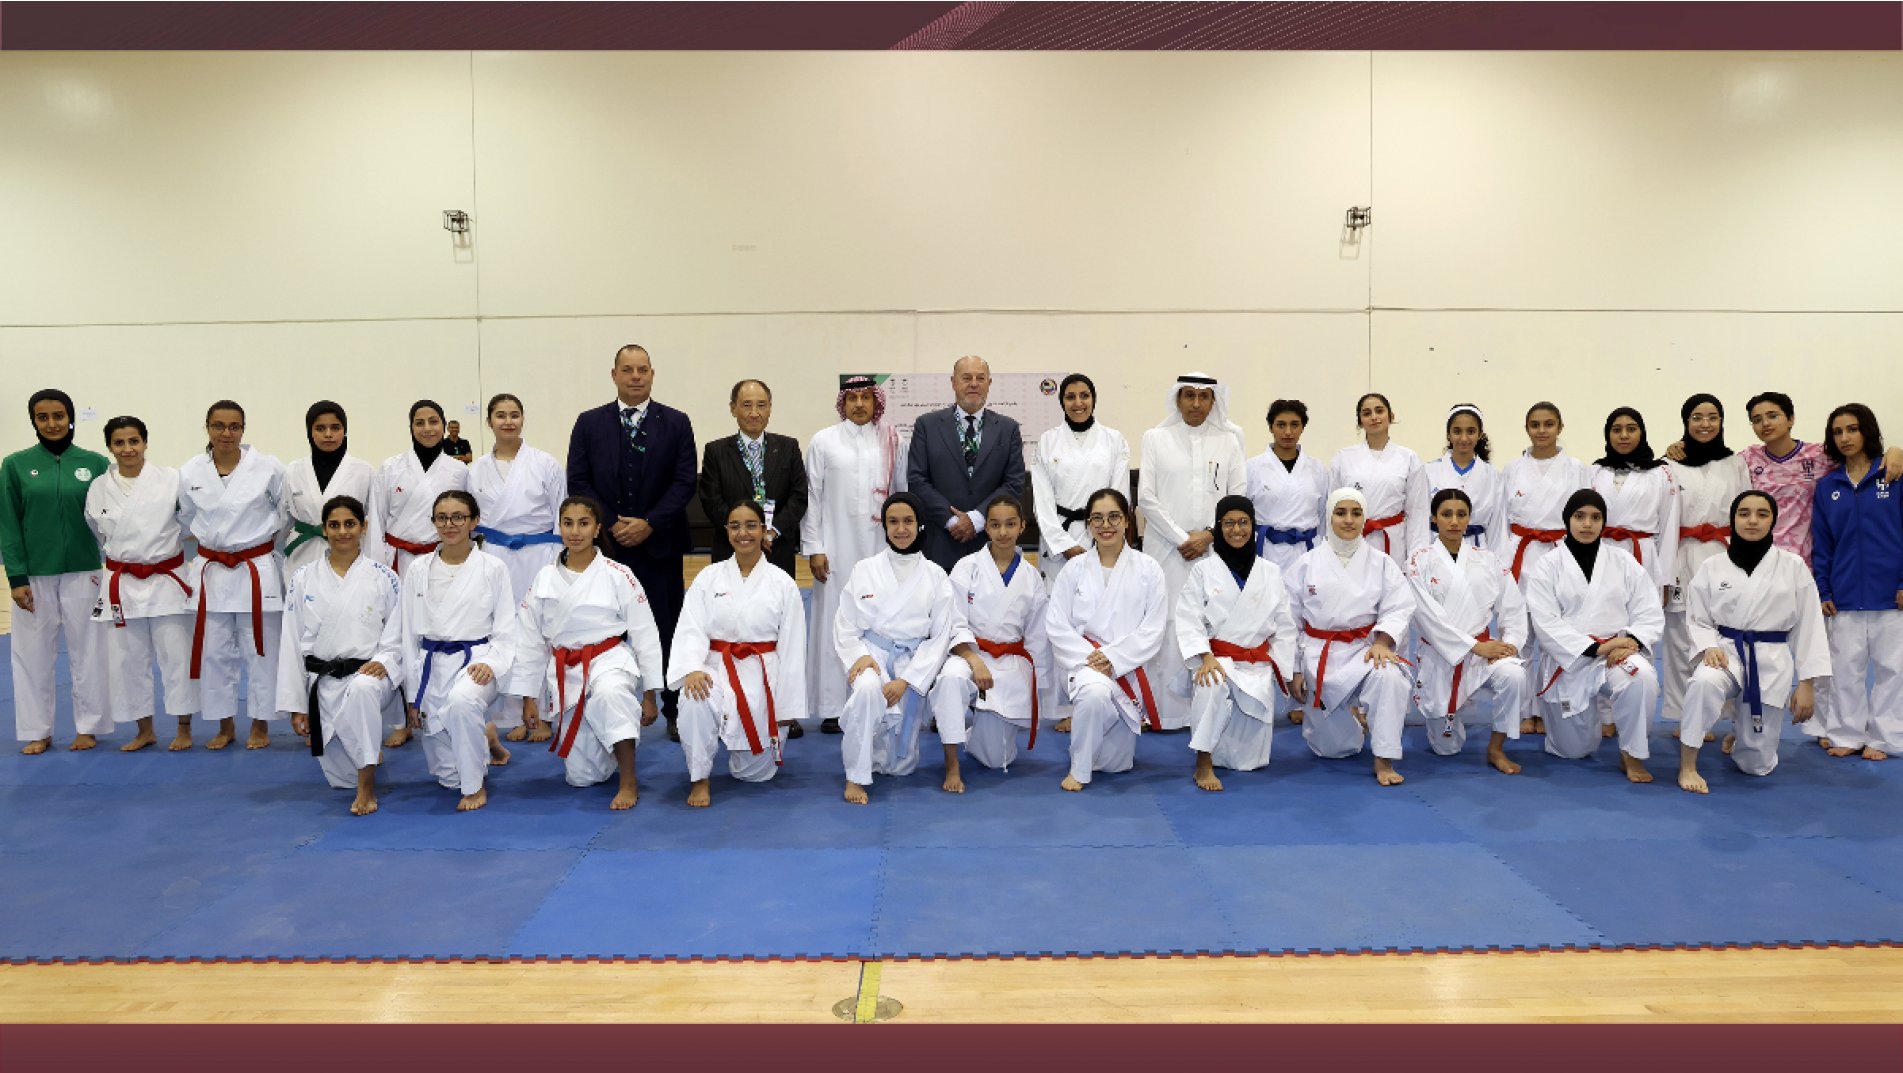 Guardian Girls Karate Seminar in Riyadh shows positive impact of Karate's project against Gender-Based Violence